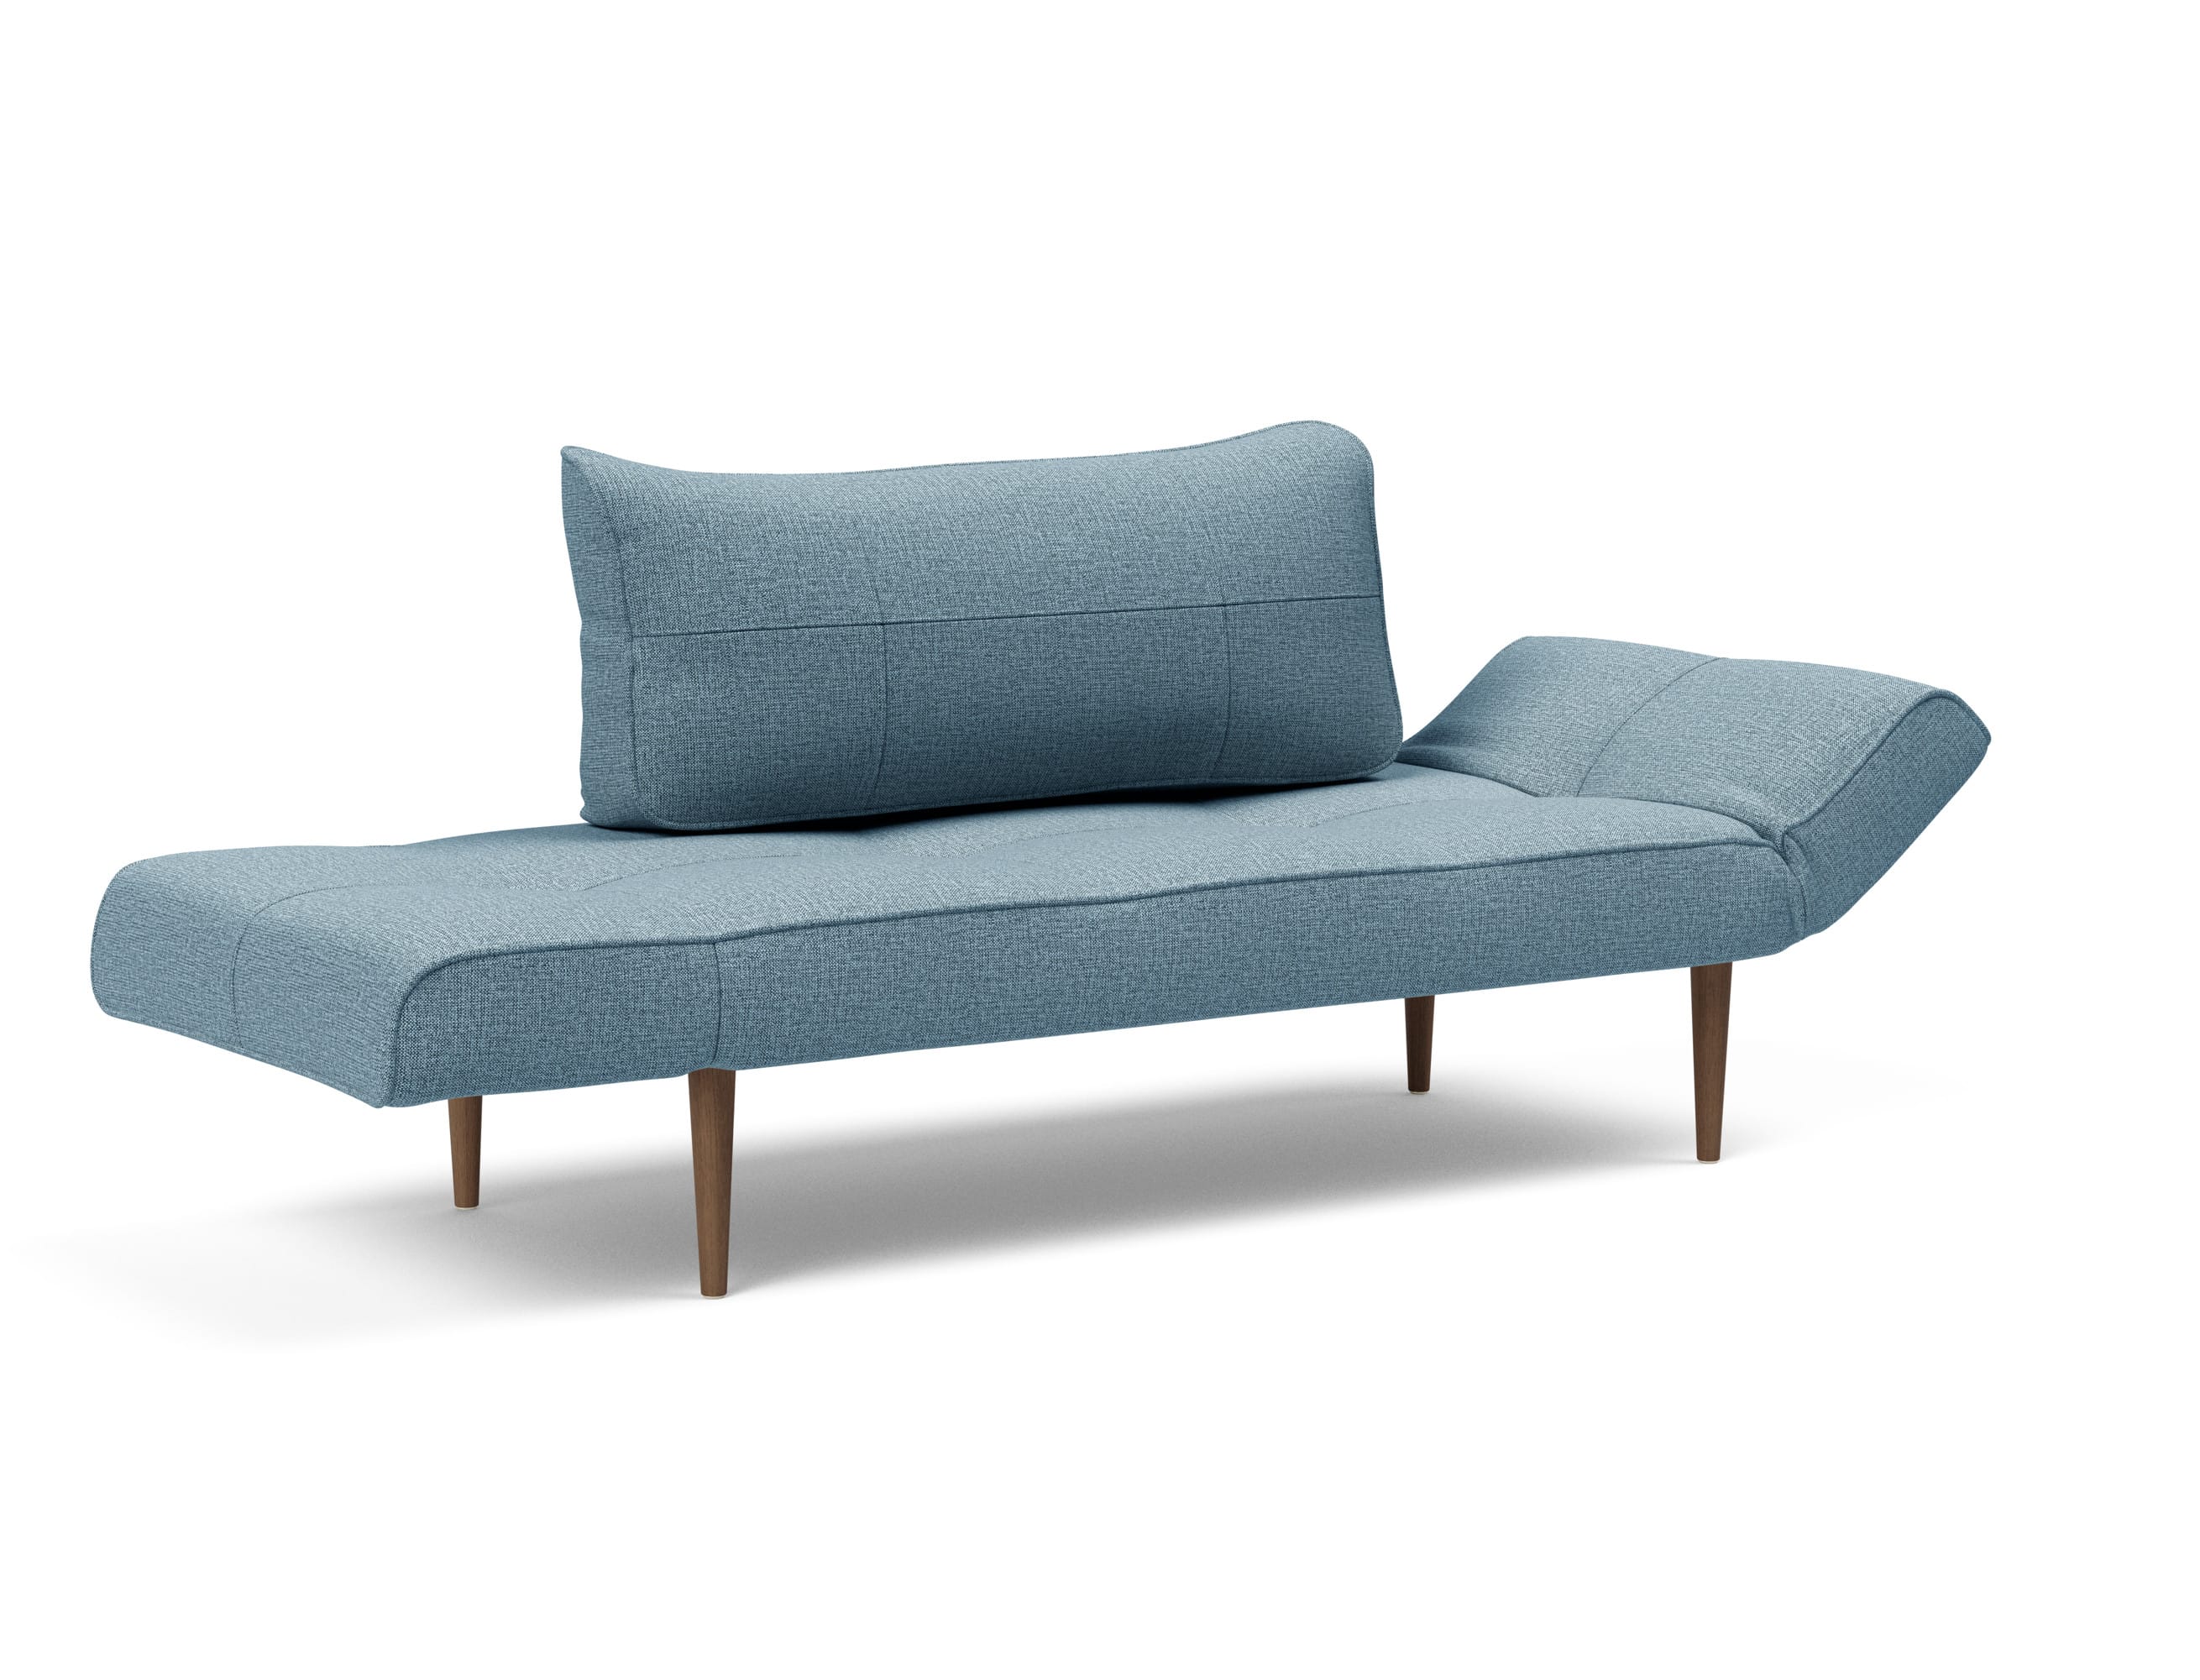 Zeal Deluxe Blue Mixed Dance Bed by Sofa Light Daybed Innovation